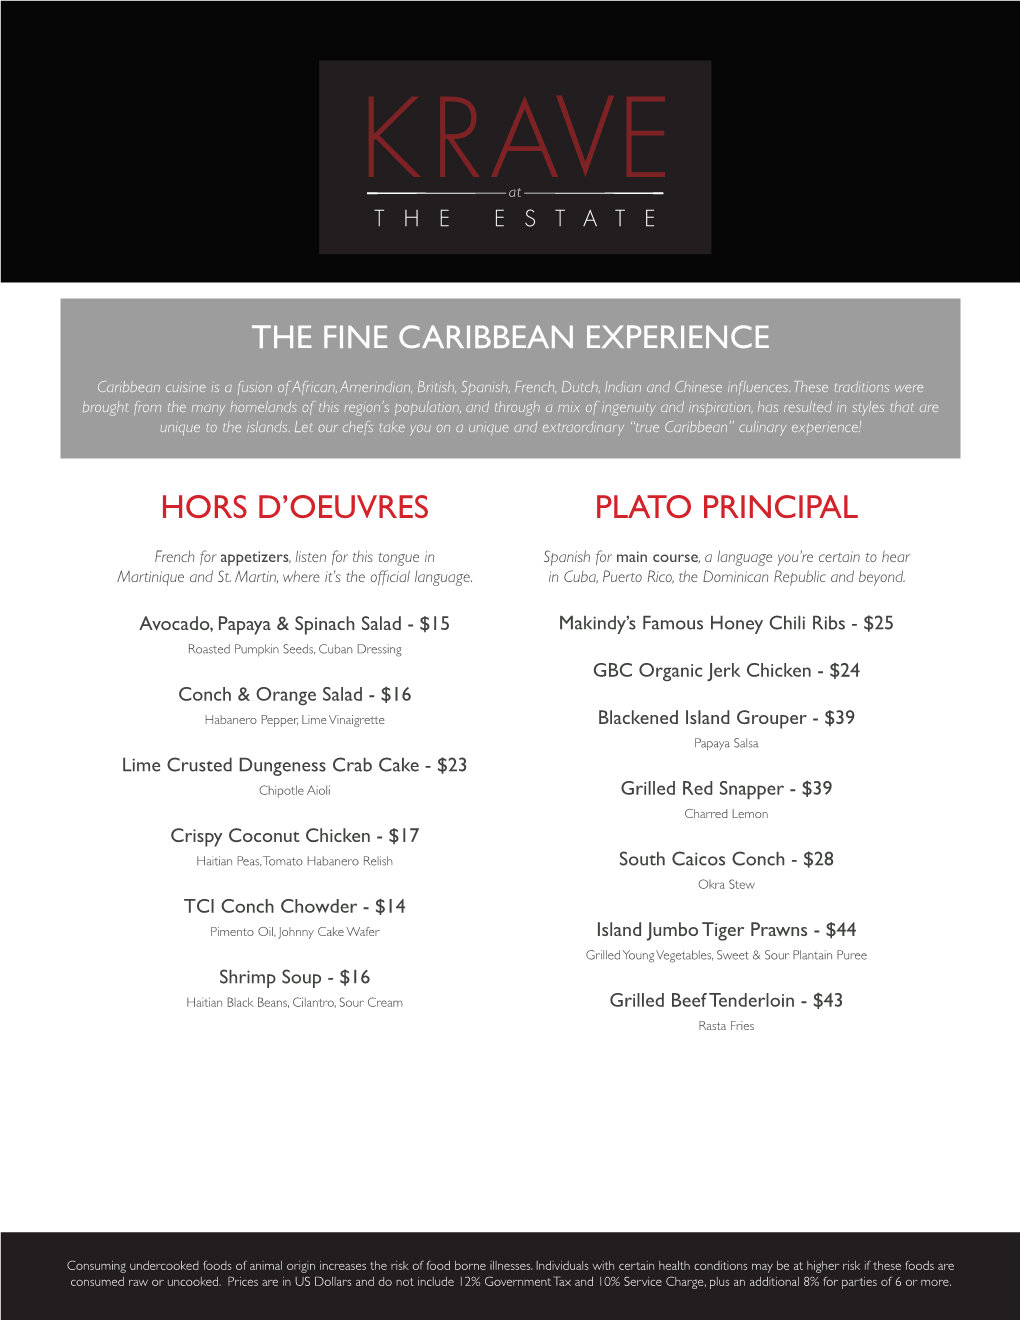 Hors D'oeuvres Plato Principal the Fine Caribbean